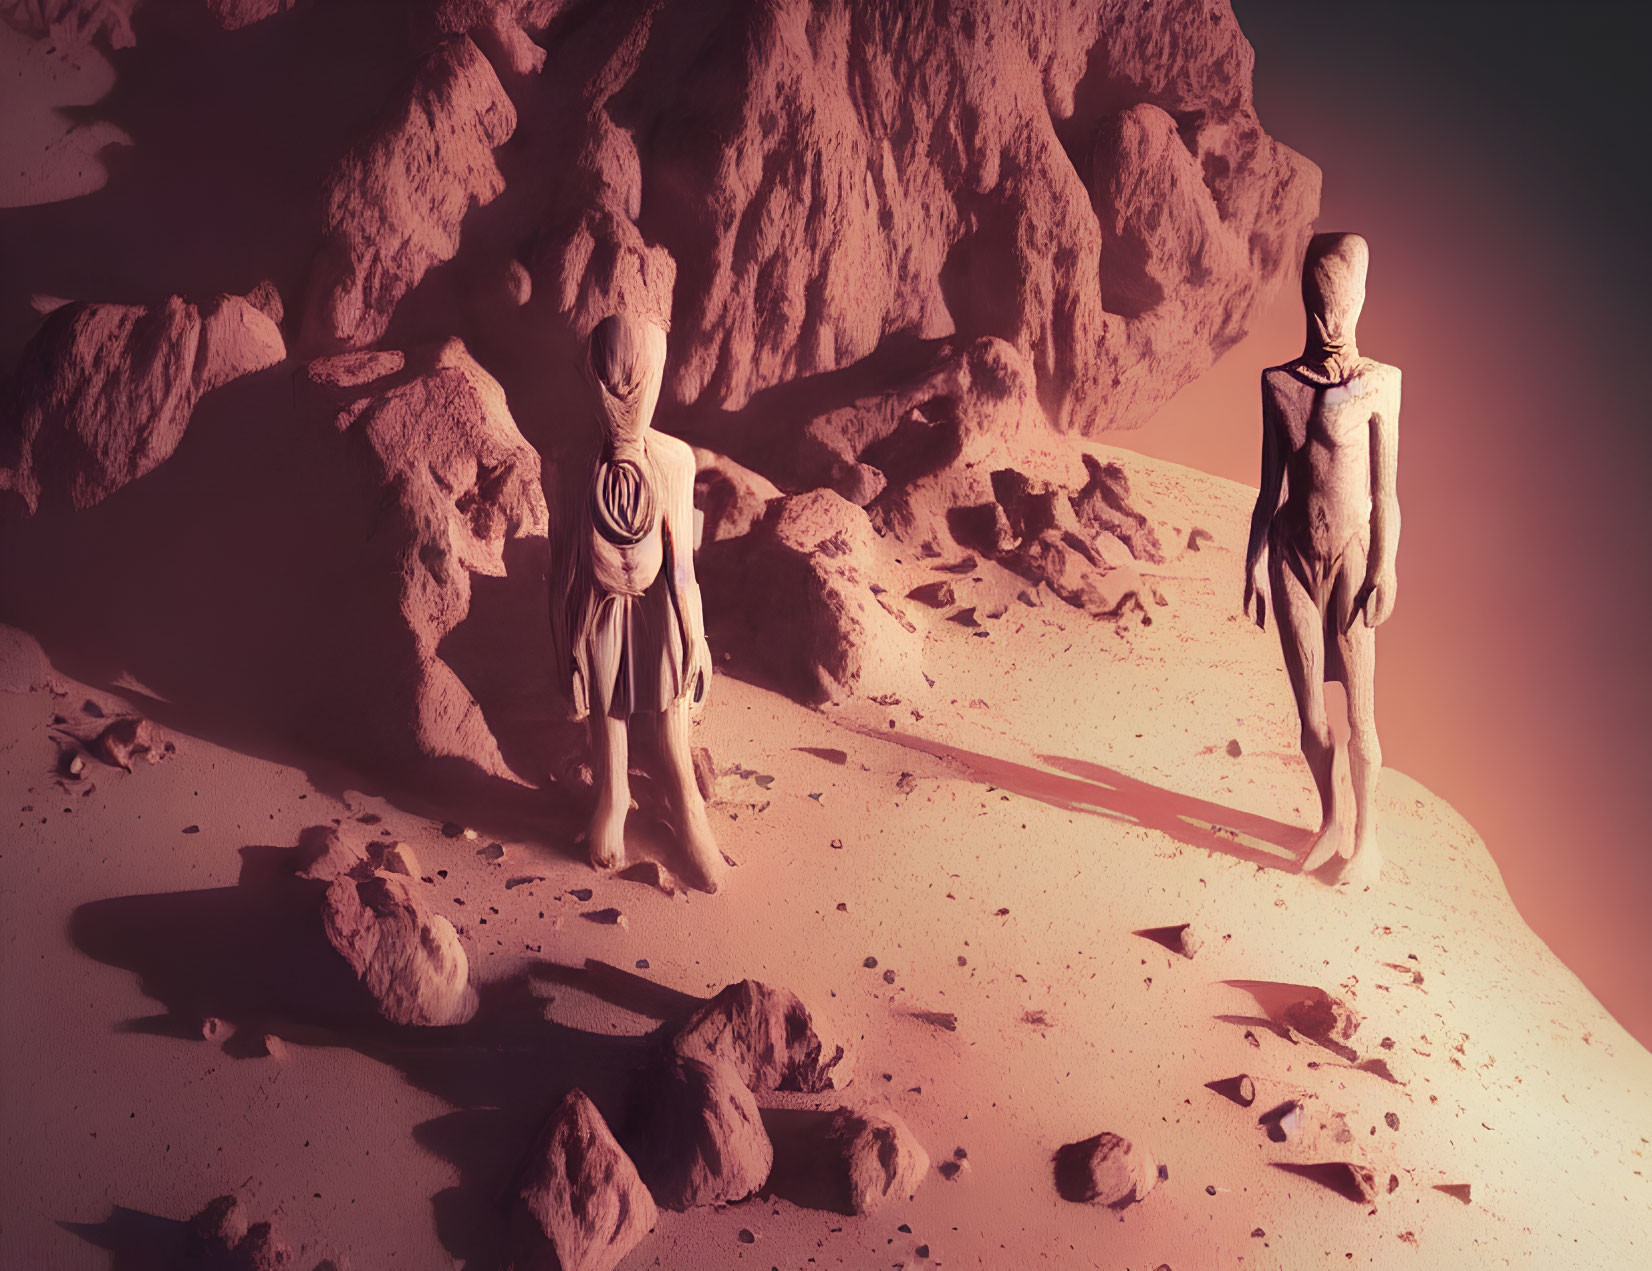 Astronauts in spacesuits on pinkish Mars-like terrain